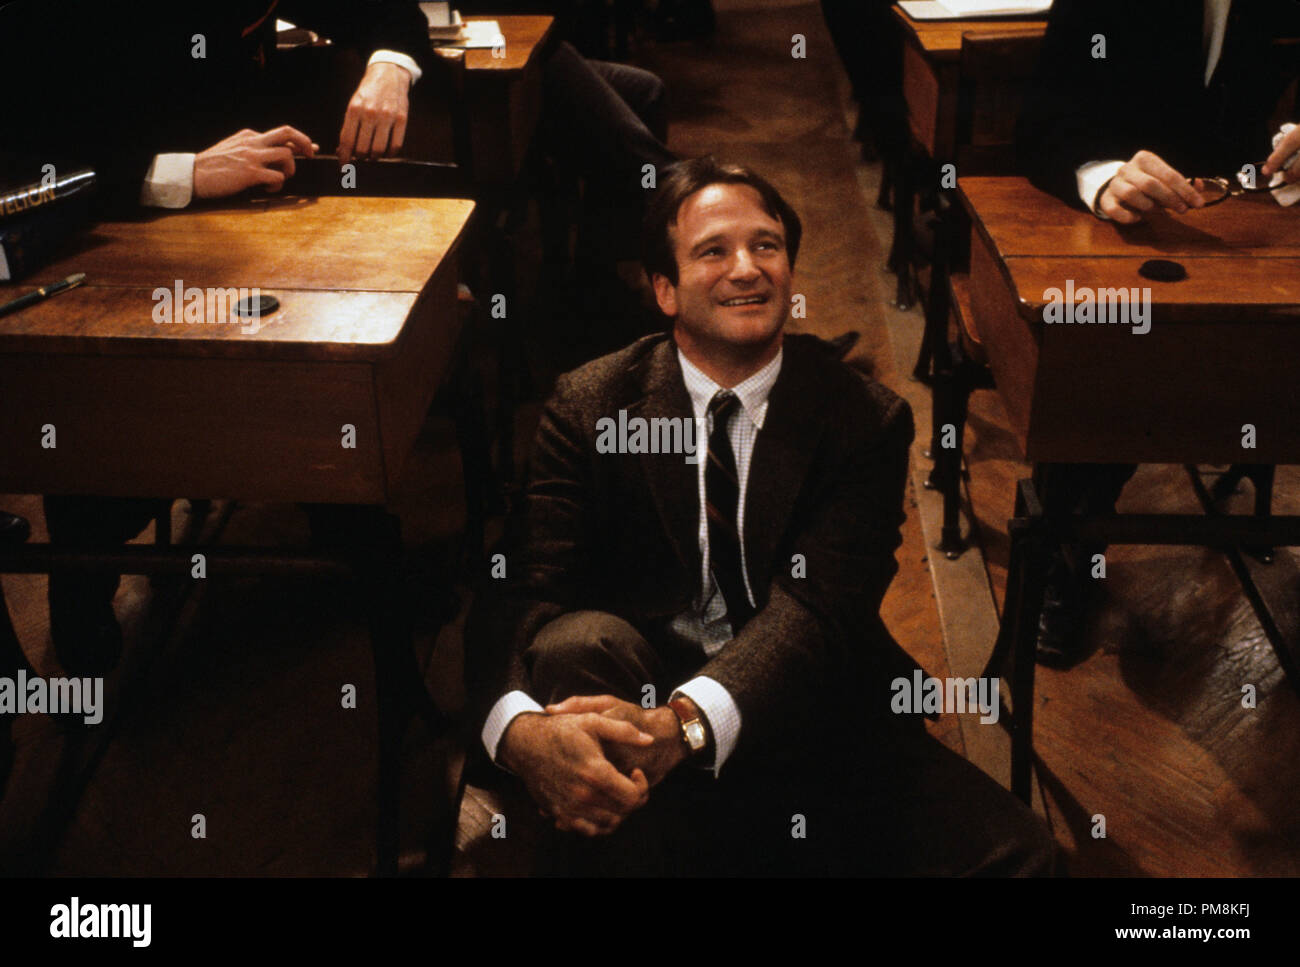 Film still or Publicity still from "Dead Poets Society" Robin Williams © 1989 Touchstone Pictures Photo Credit: Francois Duhamel   All Rights Reserved   File Reference # 31623147THA  For Editorial Use Only Stock Photo